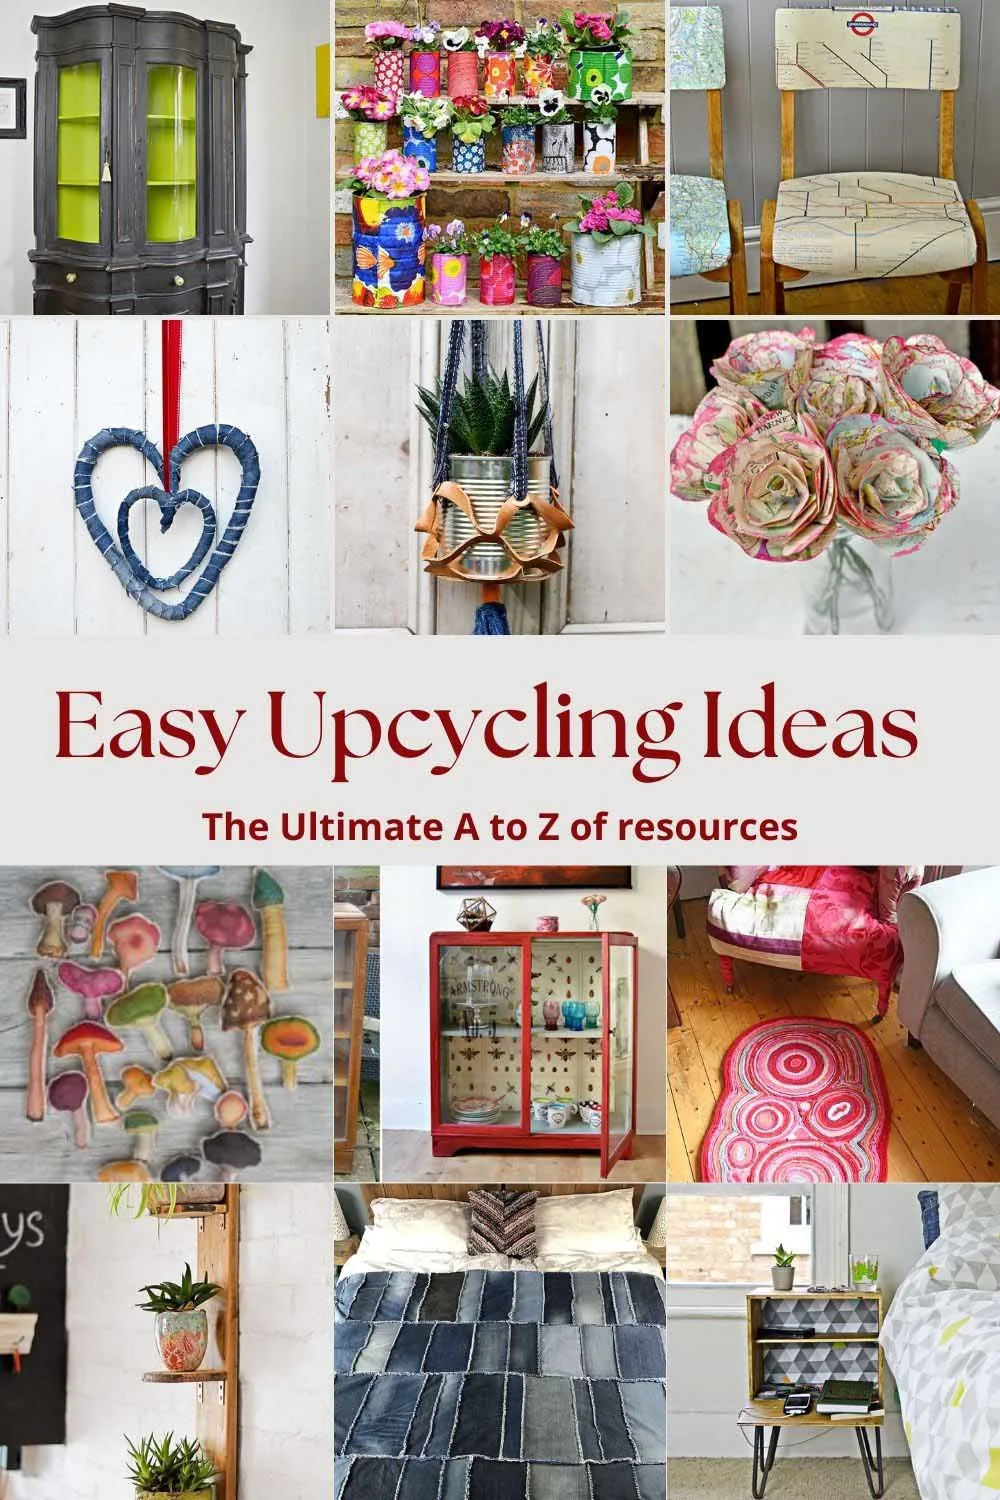 The Art of Upcycling: Turn Ordinary Items into Exquisite Crafts